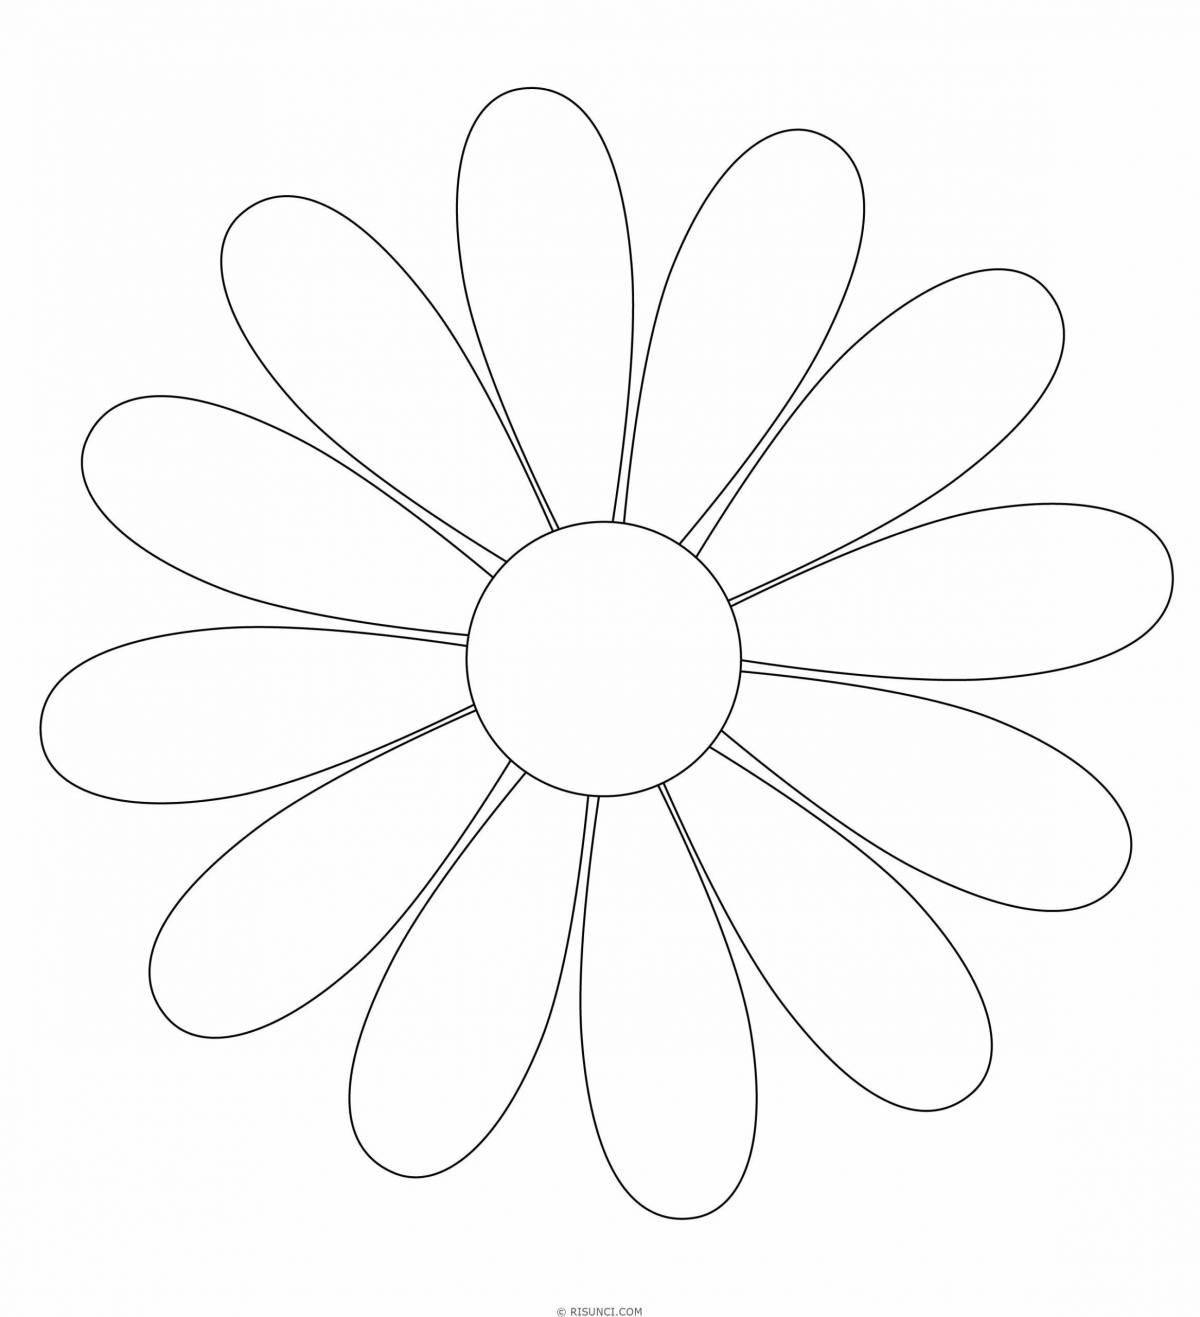 Glowing daisy coloring book for kids